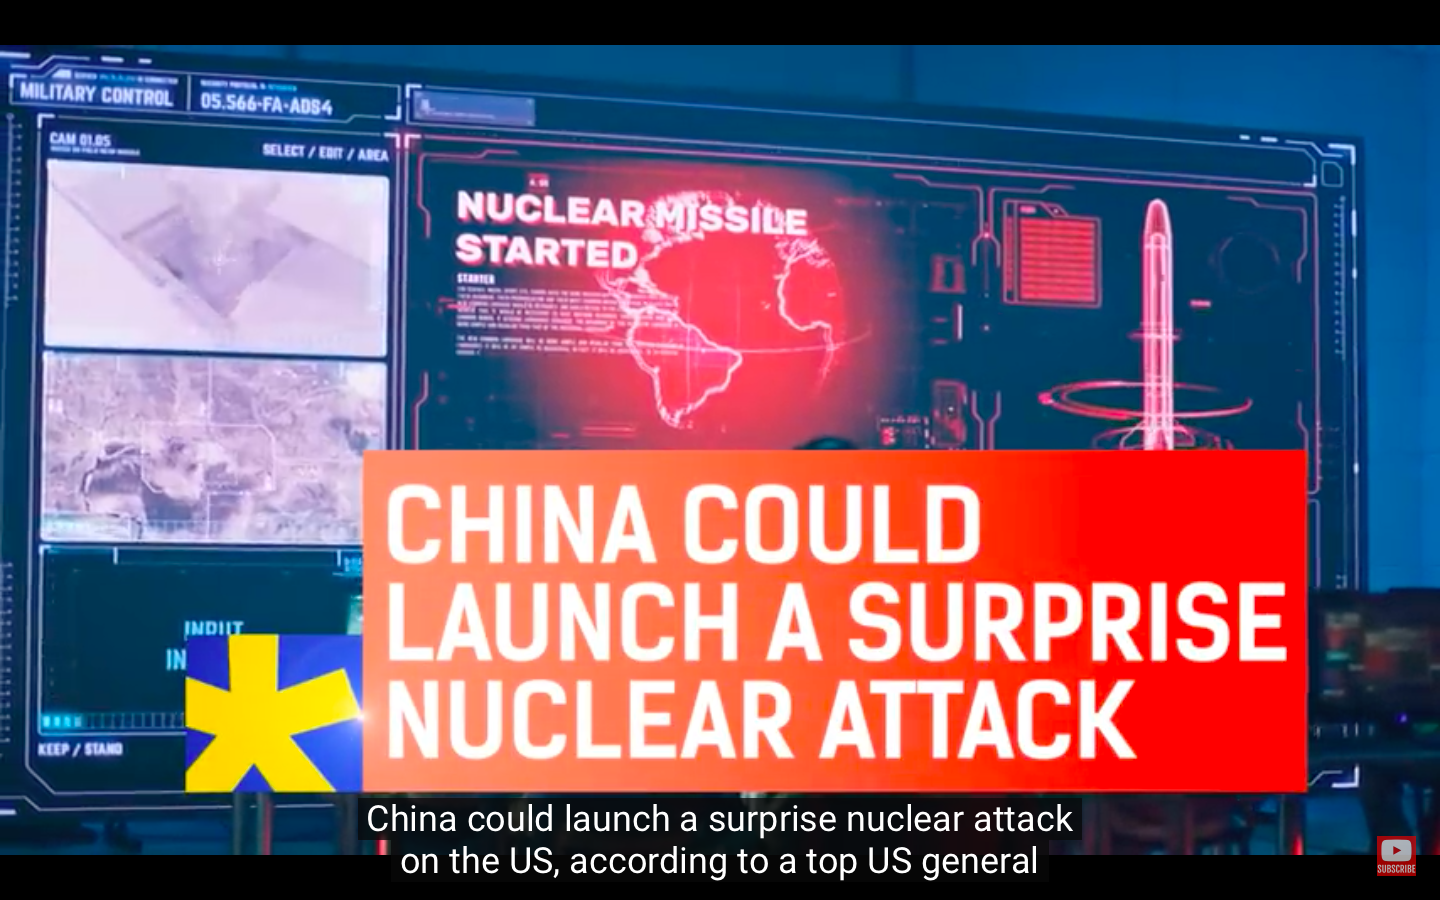 China Could Launch Surprise Nuclear Attack: Top US General